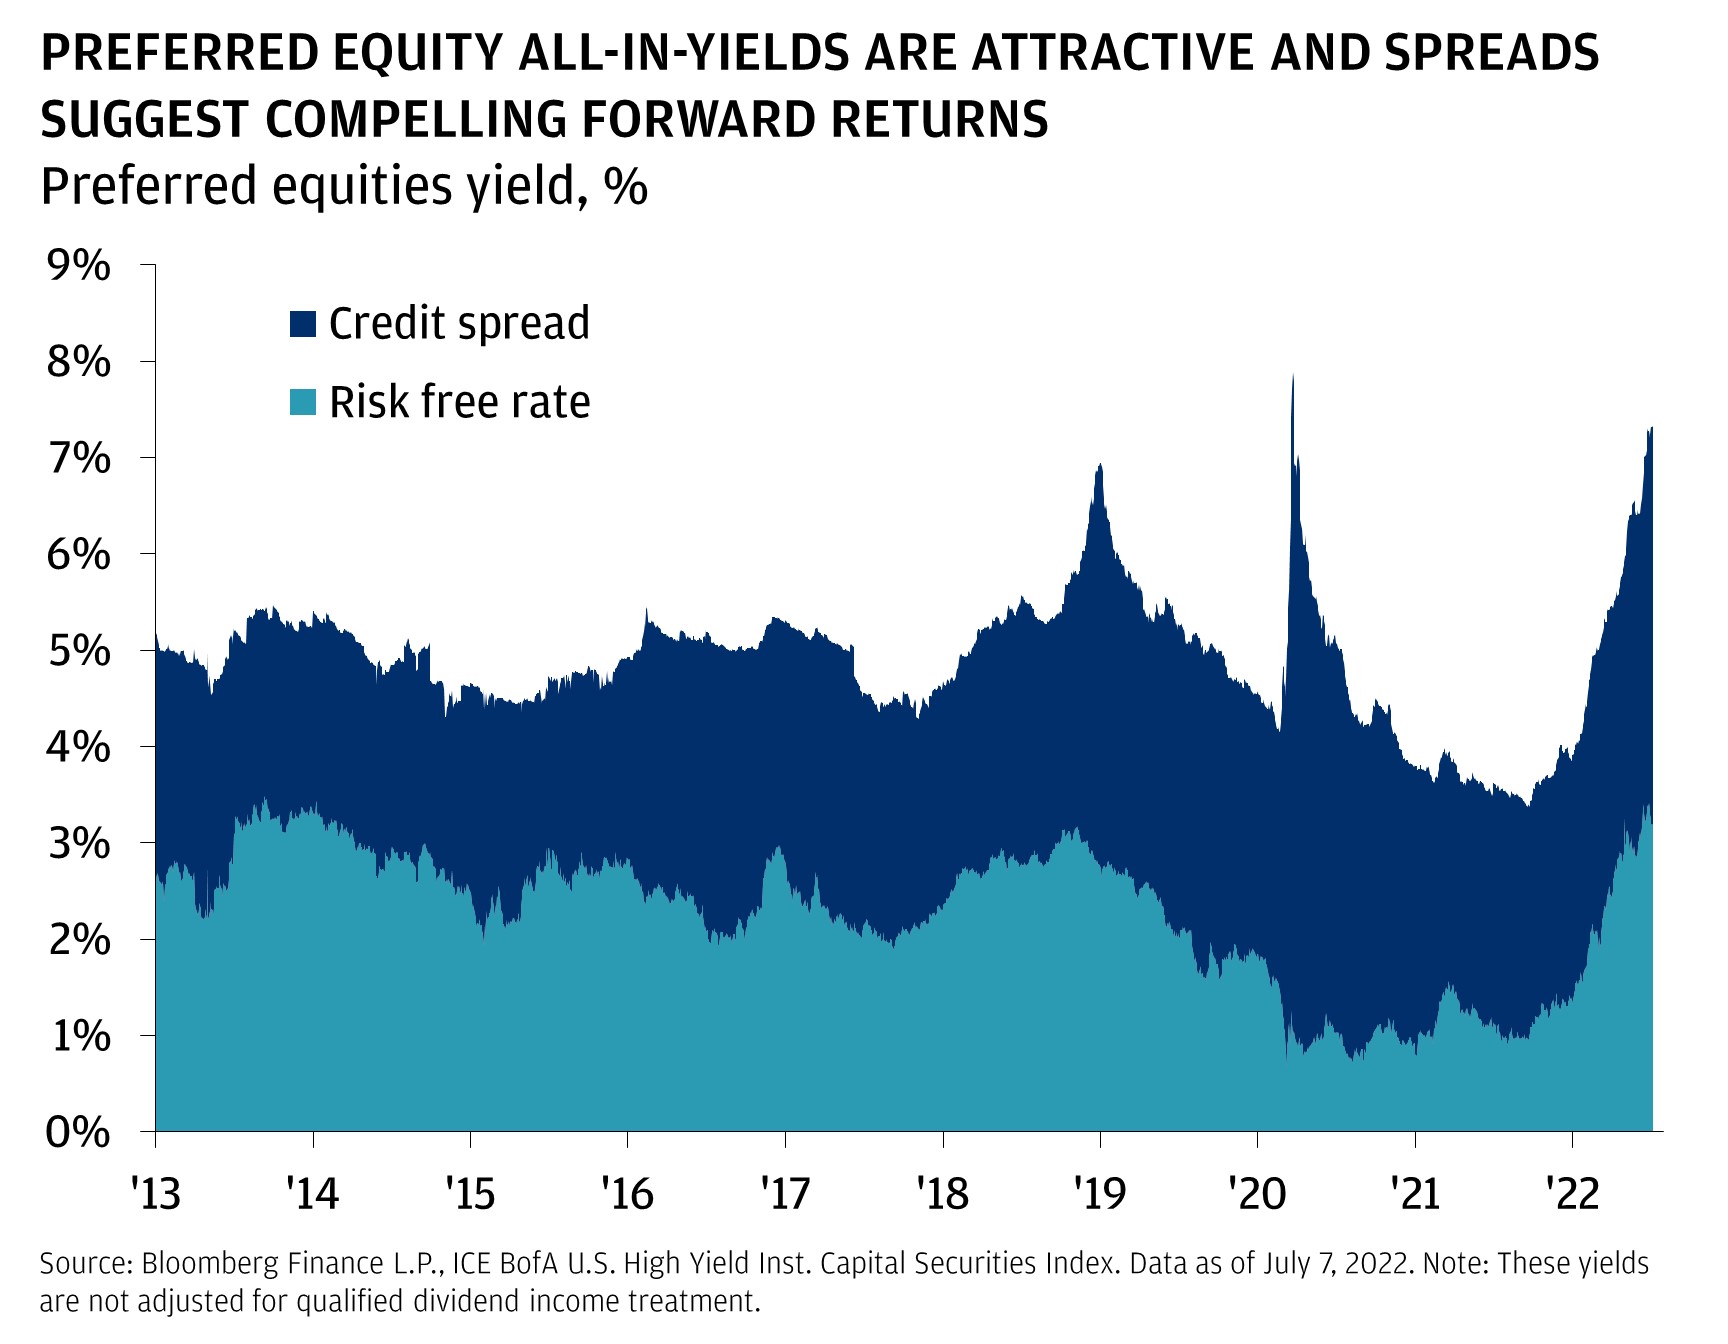 This chart shows the breakdown of preferred equities yield from 2013 to 2022, specifically the risk-free rate and credit spread over that time period.